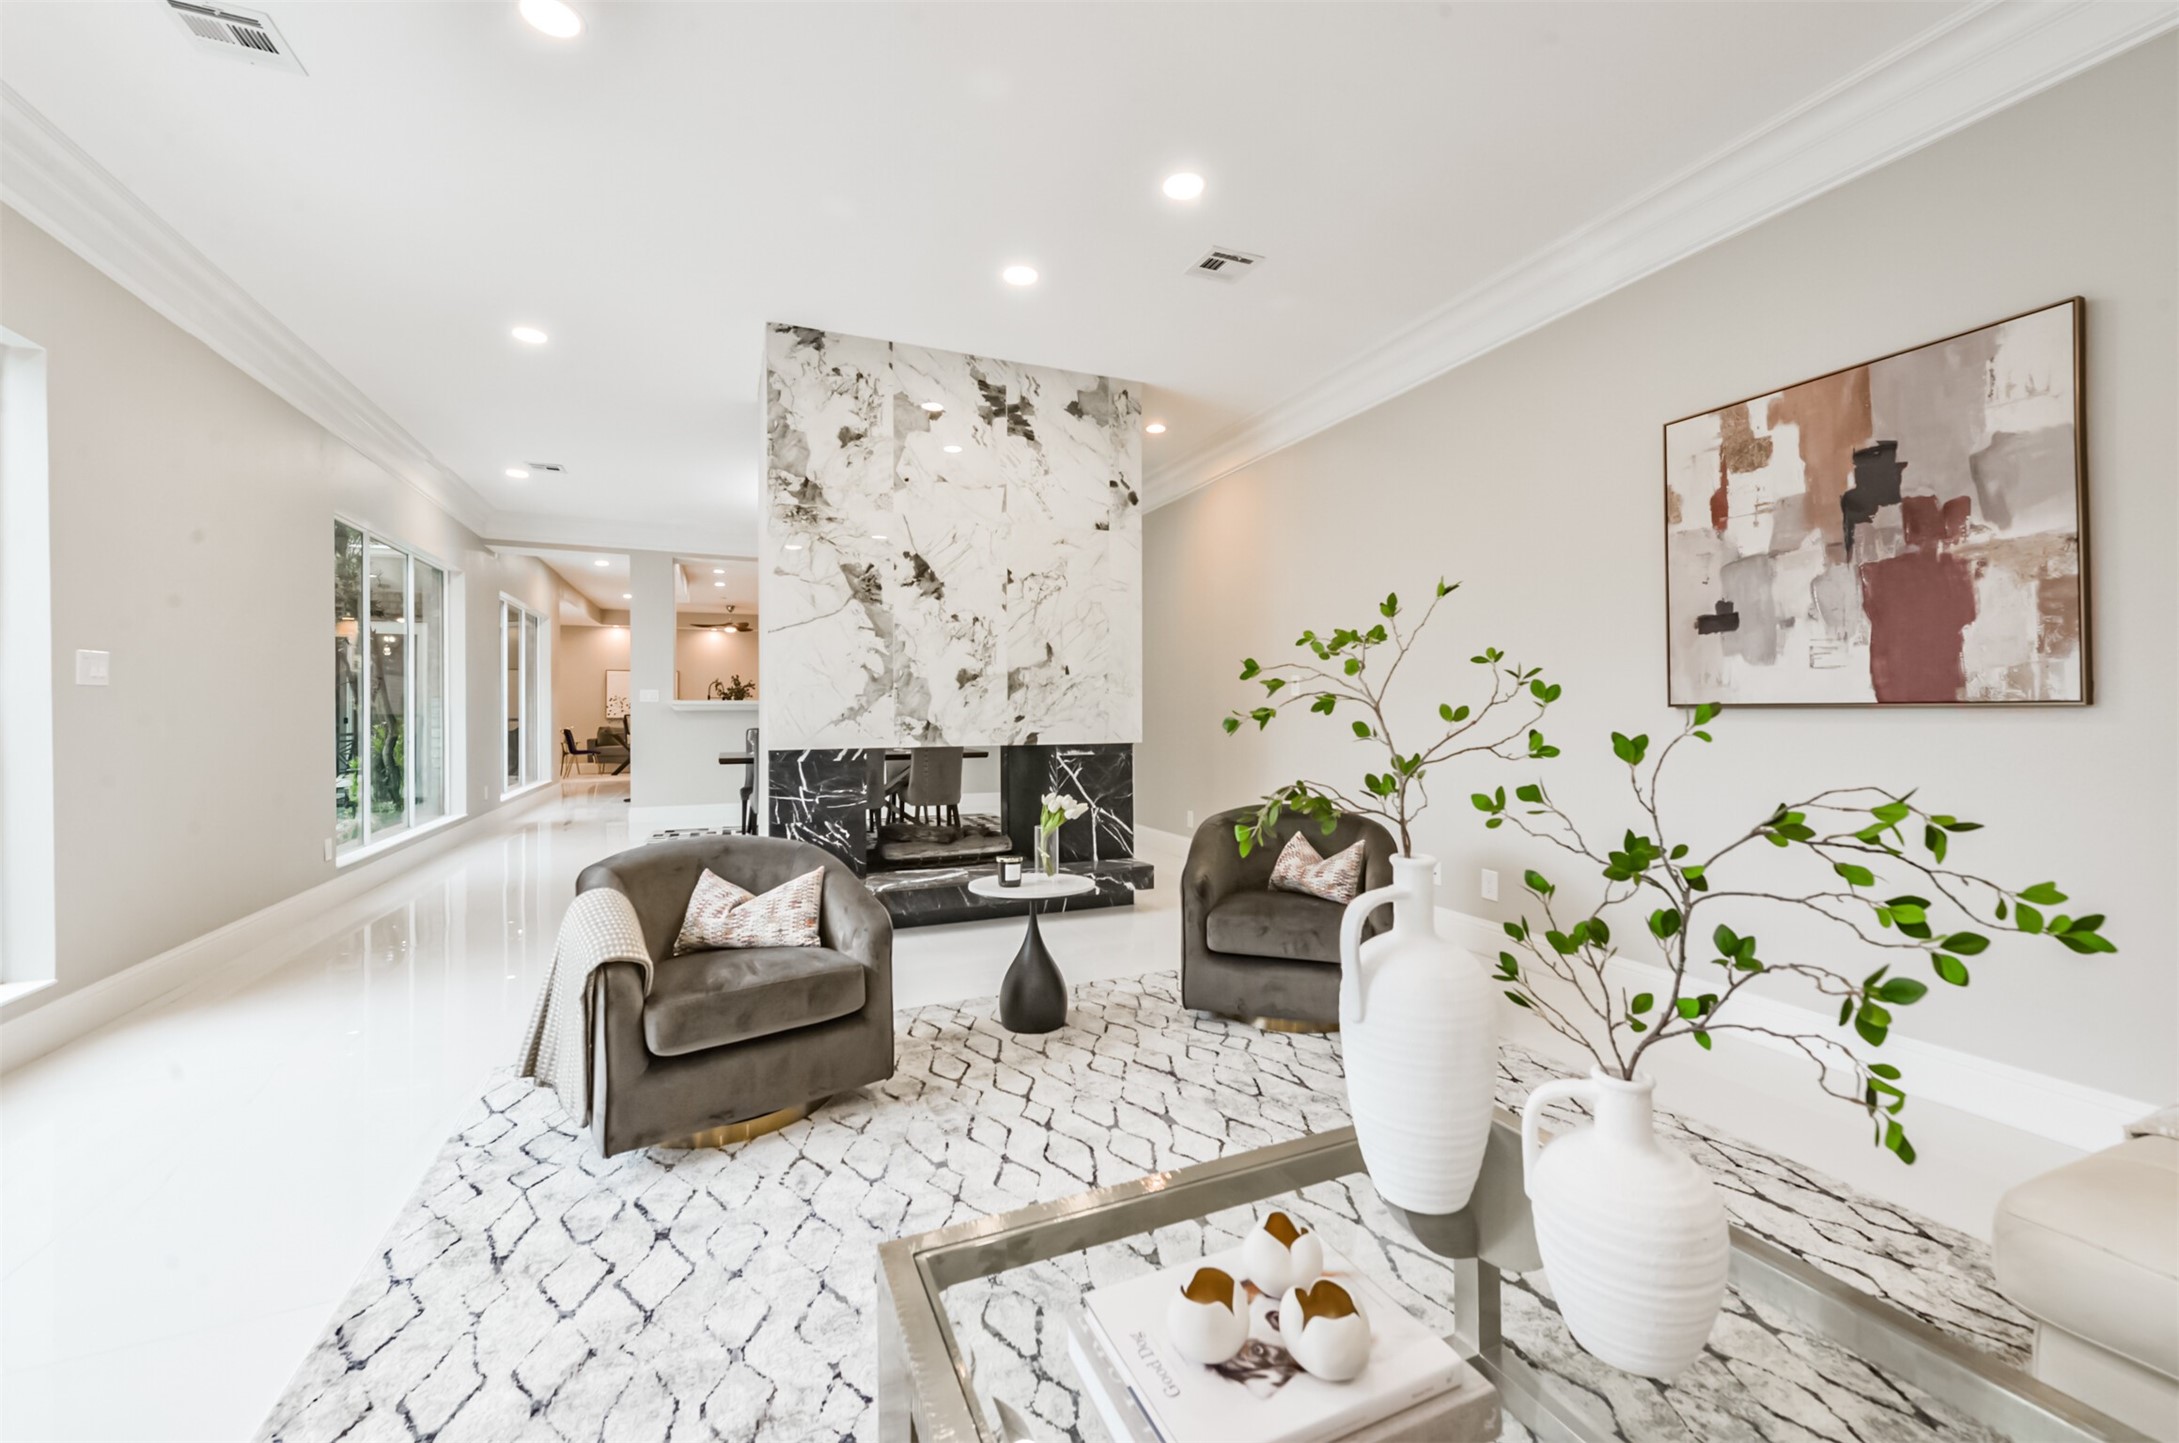 This COMPLETELY RENOVATED modern and inviting home is designed to impress. The striking double sided fireplace is a focal point that serves as both functional artwork and room divider between the formal living and dining spaces.